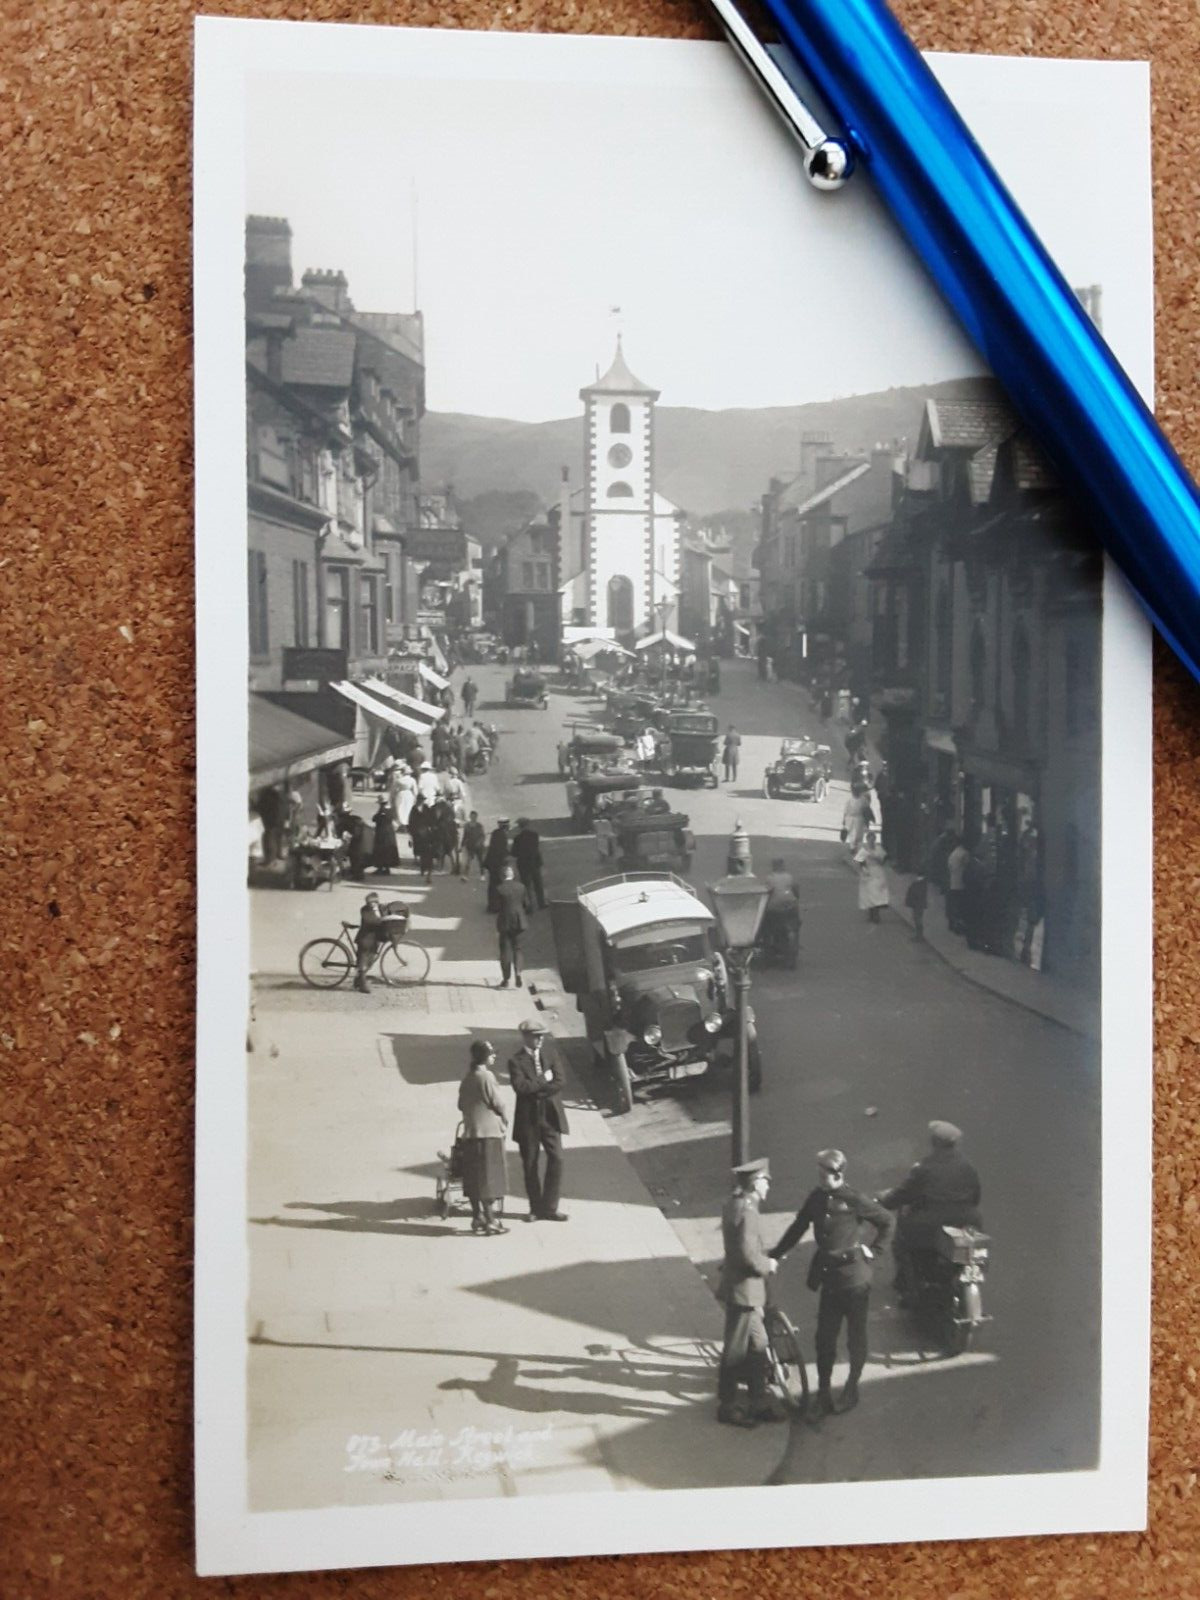 House Clearance - Service Cumbria Keswick Main St ,Town Hall Old vehicles & Servicemen Real photo